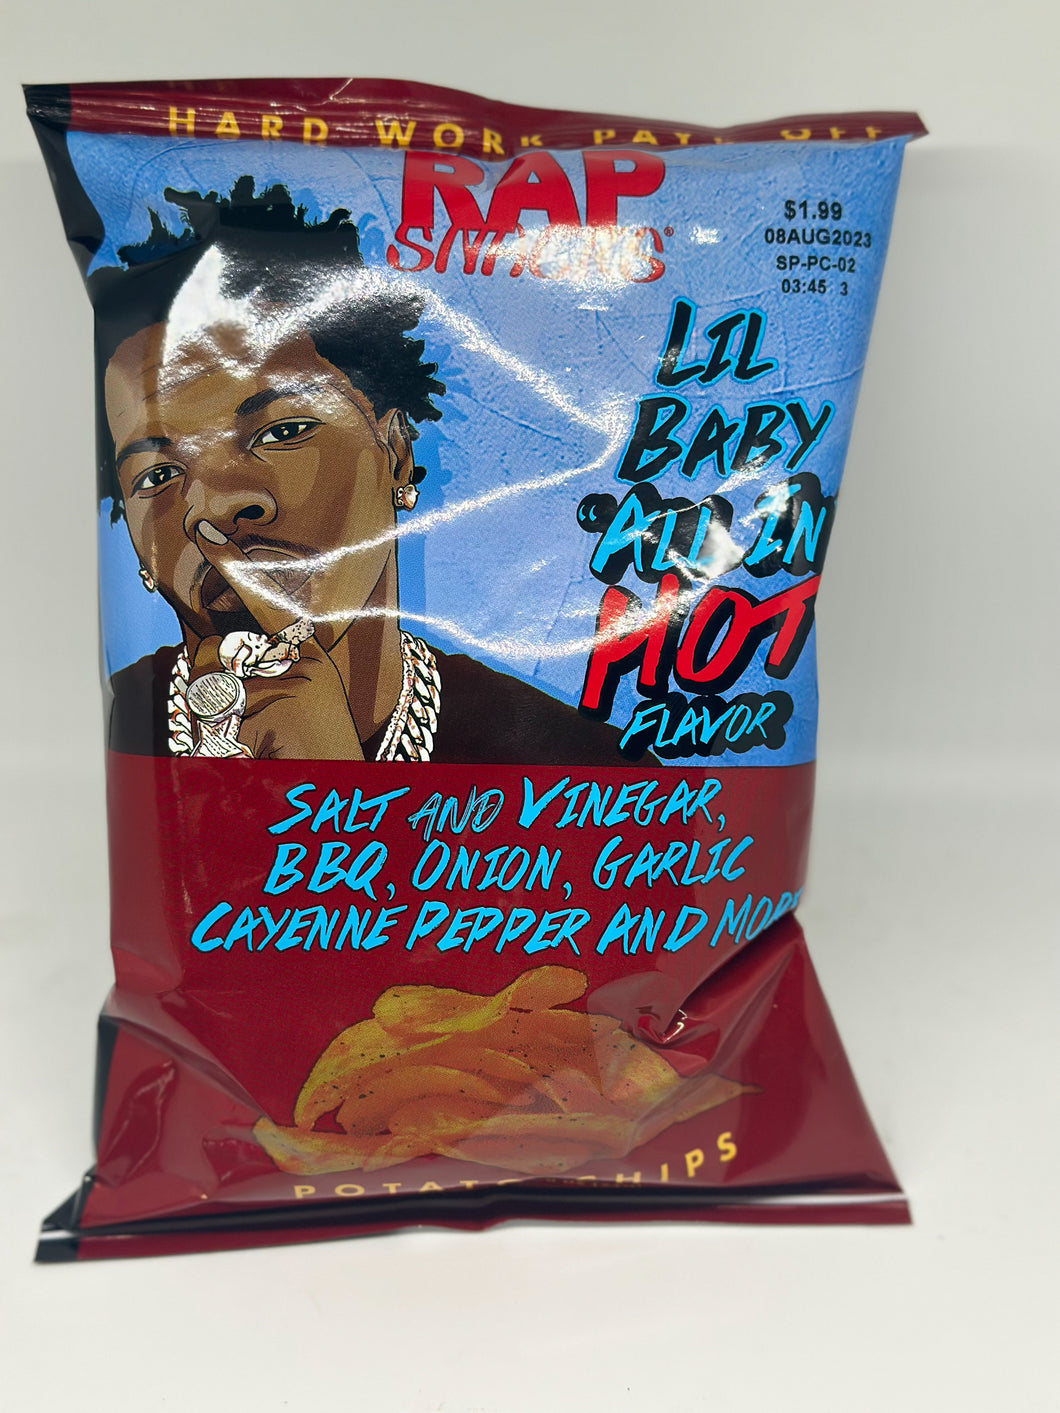 Rap Snacks lil baby all in hot flavor